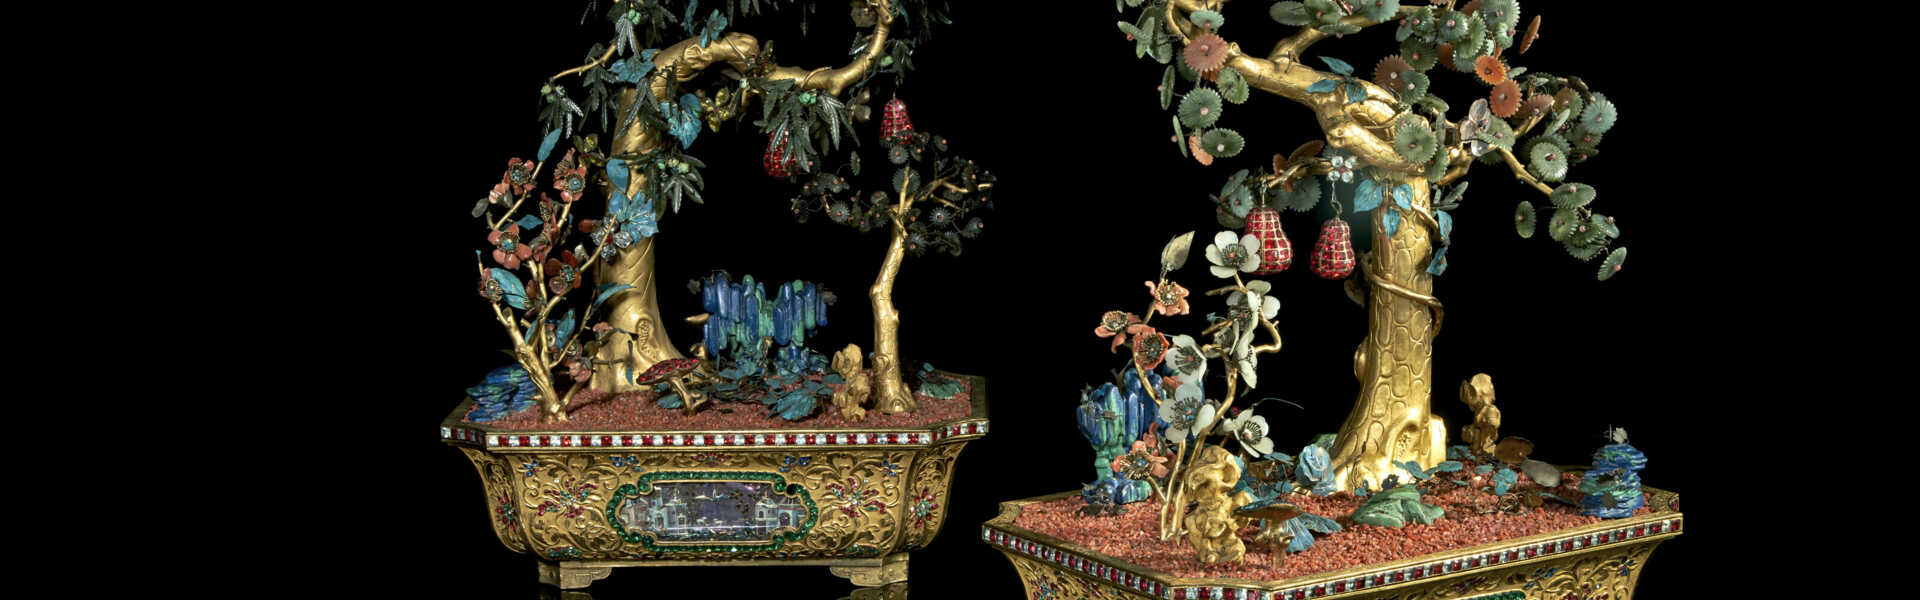 A PAIR OF CHINESE KINGFISHER FEATHER, JADE, HARDSTONE AND CORAL GILT-BRONZE MODELS OF TREES IN JARDINI&#200;RES